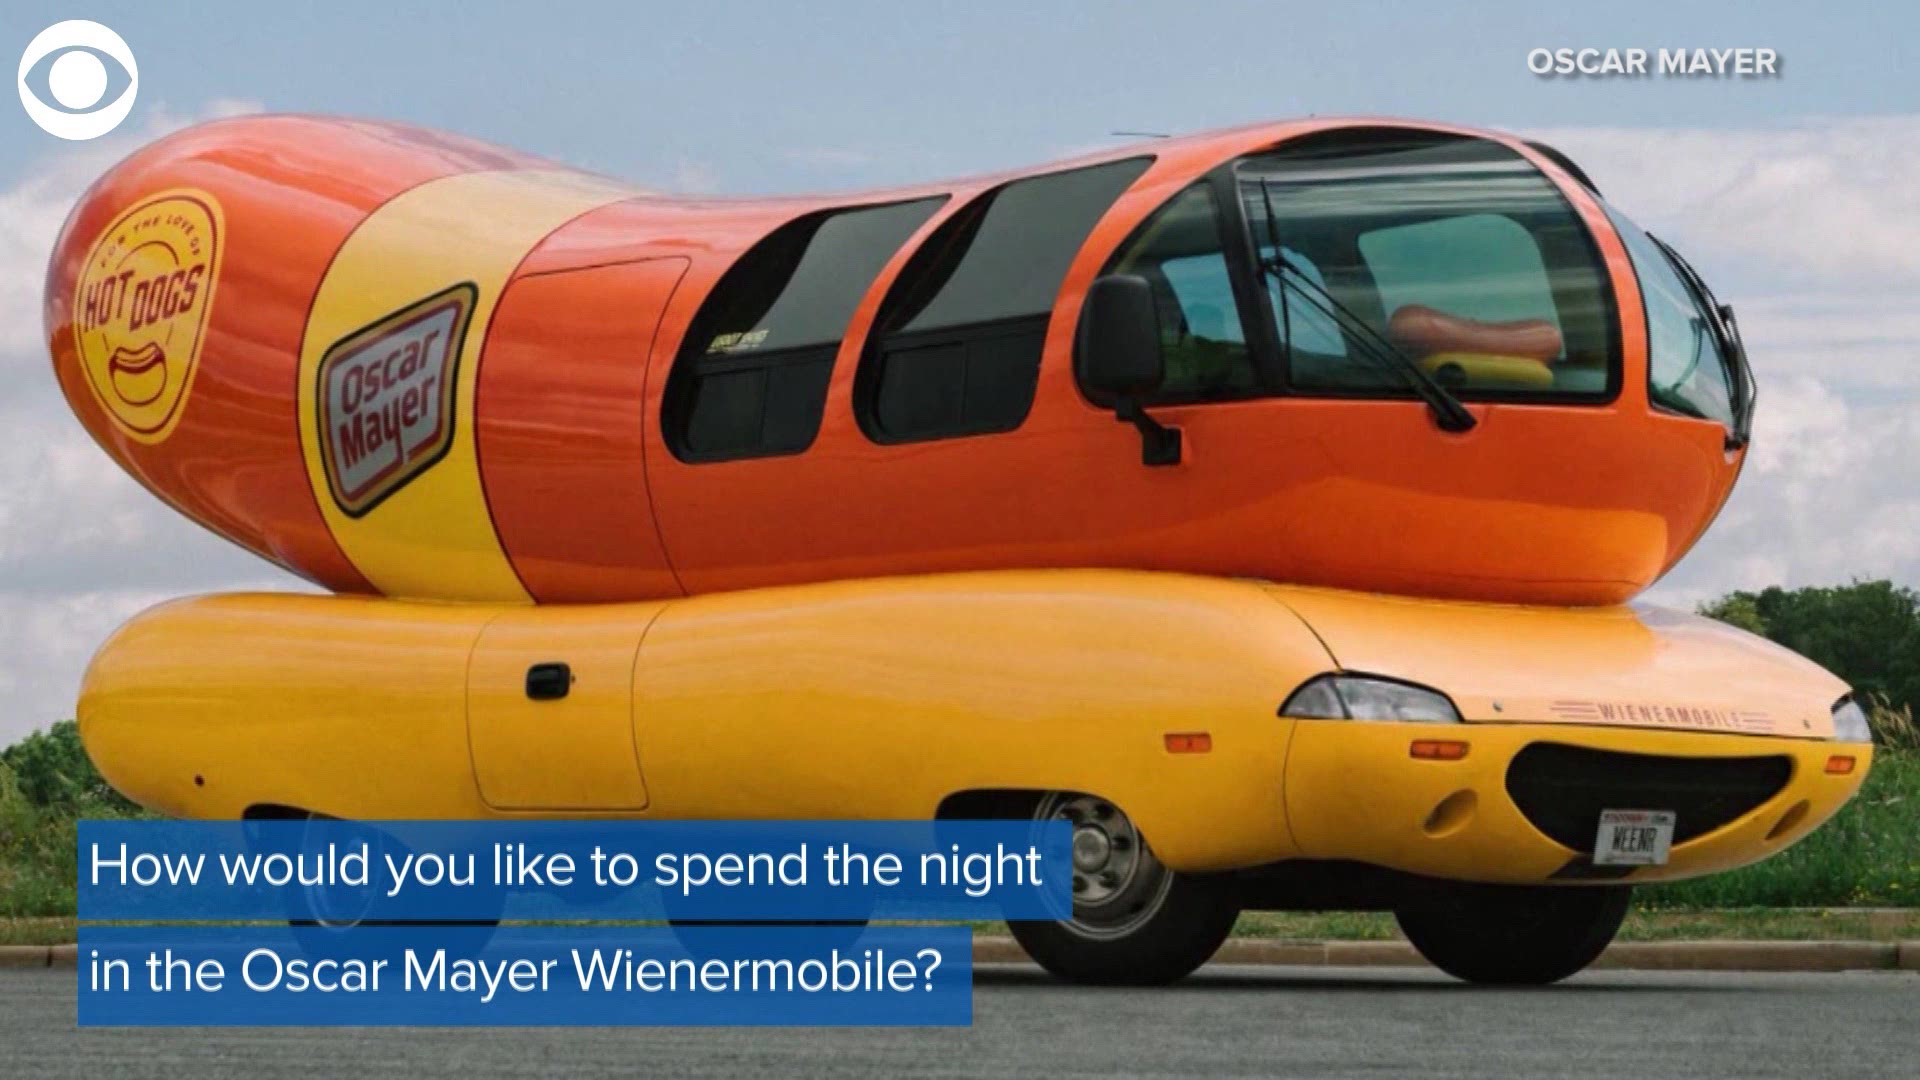 Let’s be frank, this is a story for hot dog lovers.  Would you pay to spend the night in the Oscar Mayer Wienermobile? Here’s your chance.